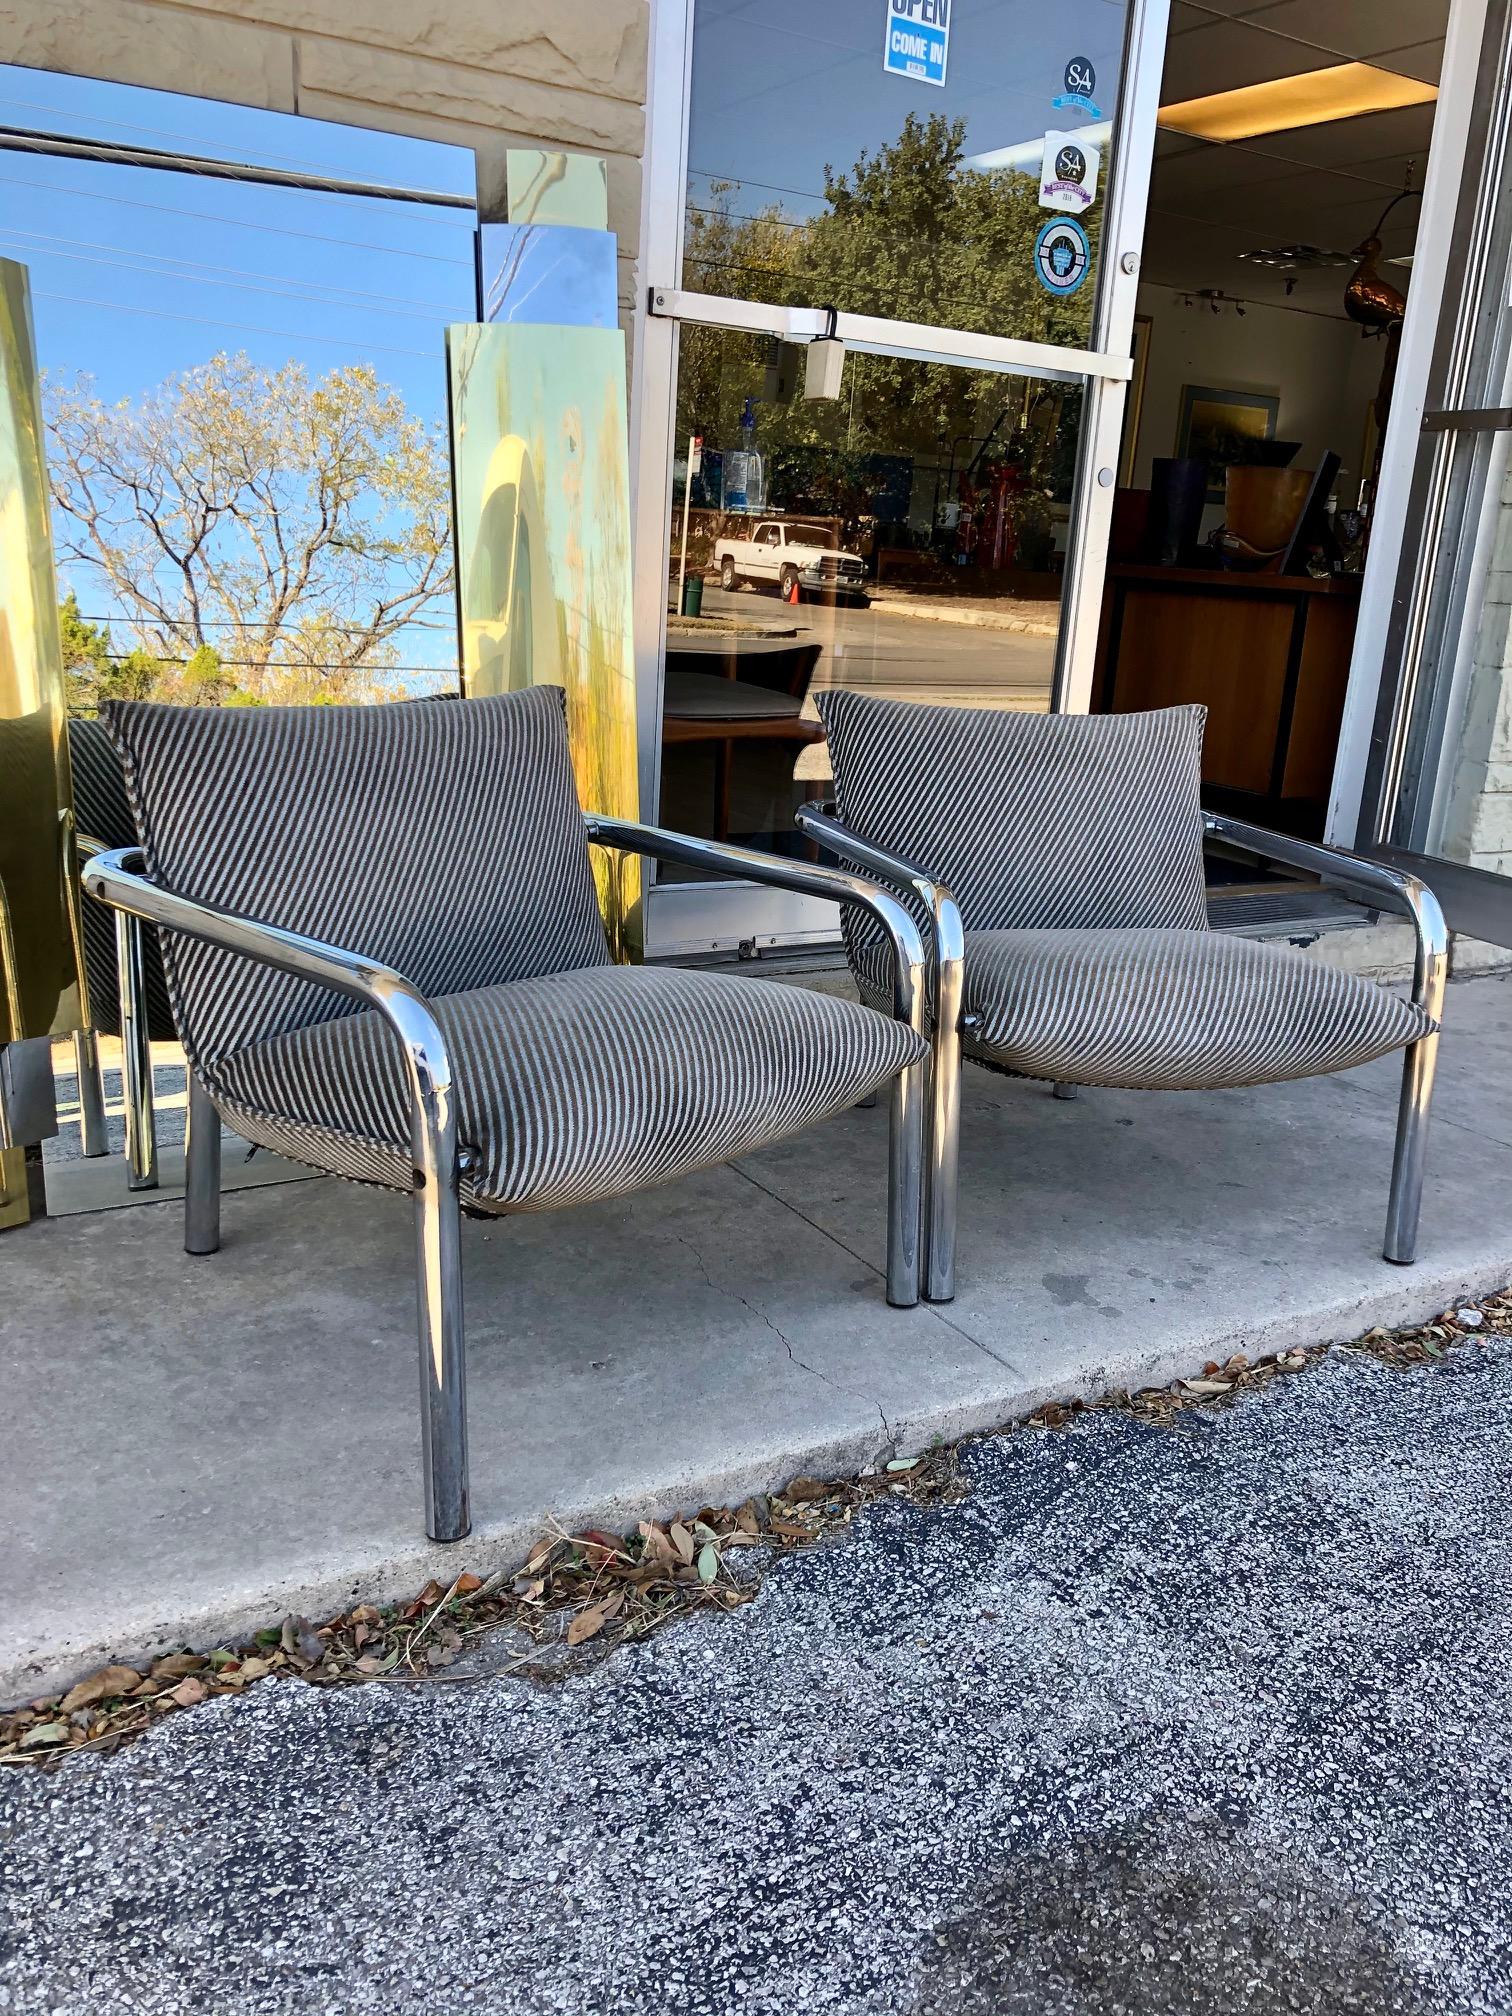 These armchairs are in overall good condition. Chrome frame. Dark grey/light grey stripe upholstery. Function meets style with this comfortable pair. Unknown designer/maker.
circa 1970s.
Dimensions:
27